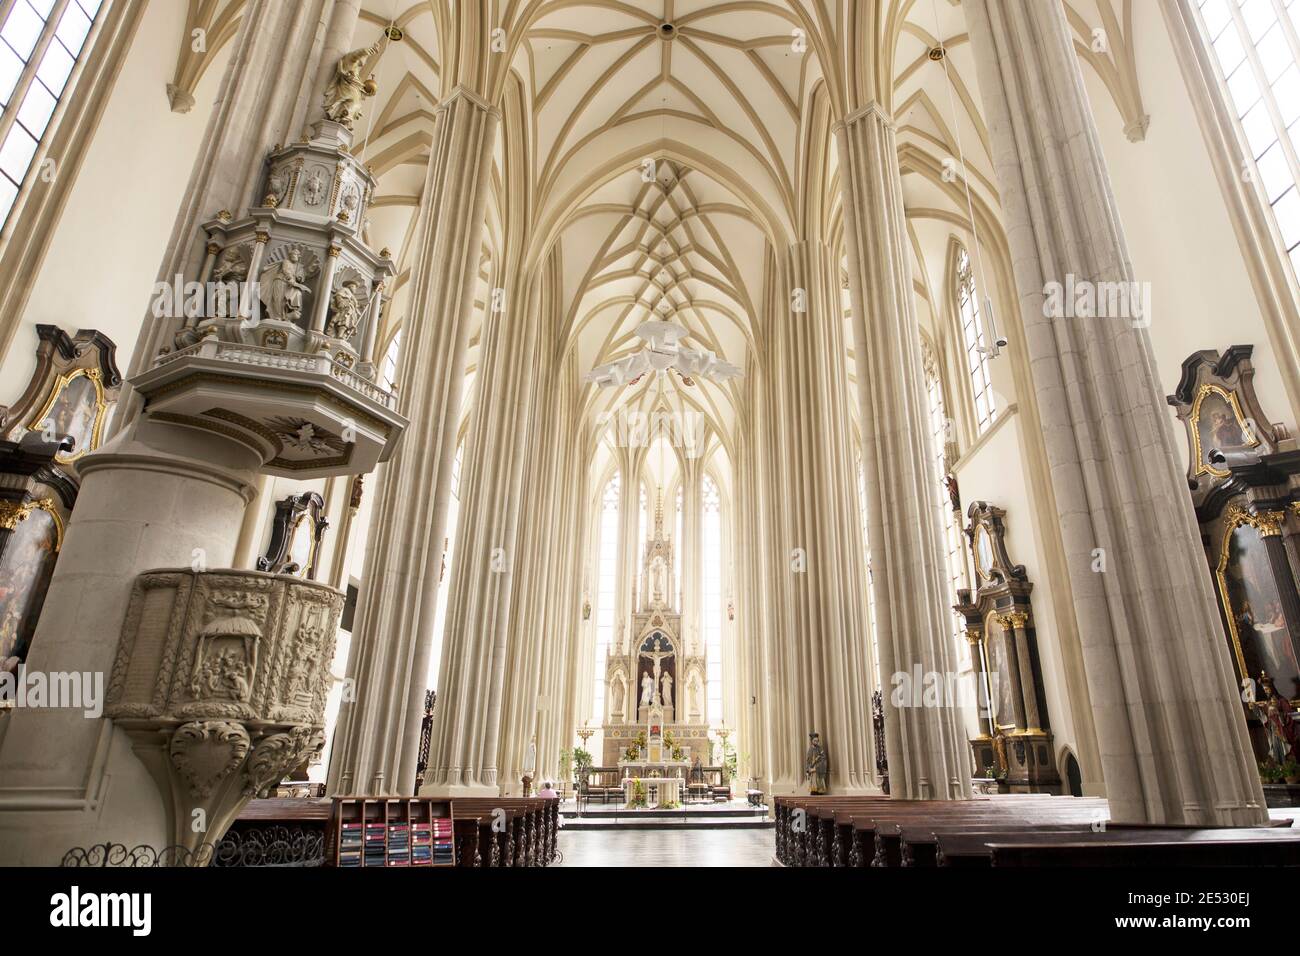 The interior and altar of the Church of St James, a late Gothic Catholic church in Brno, Czechia. Stock Photo